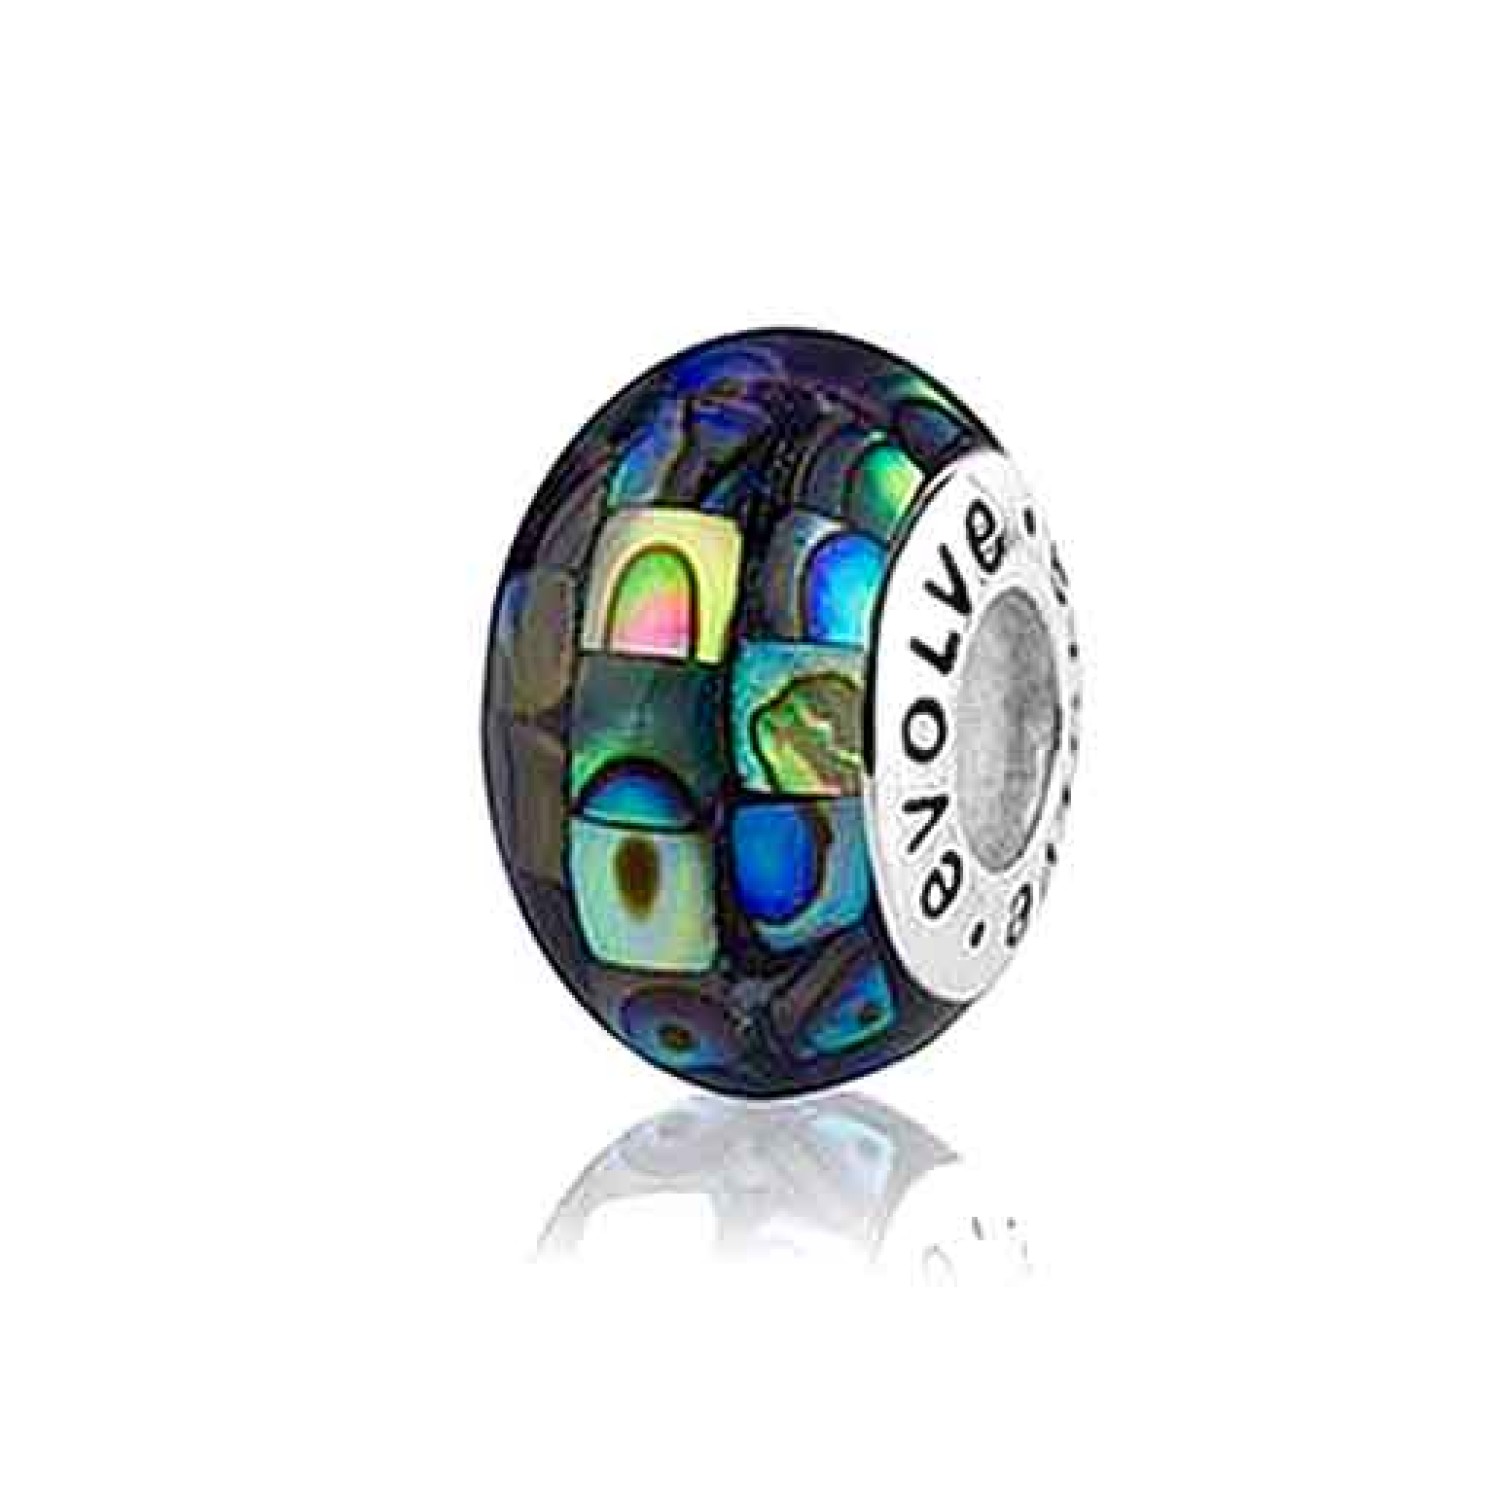 LKP006 Evolve Paua Charms Paua Mosaic. Our precious Paua Mosaic Charm symbolises inner strength and resilience within communities. The beautifully interlinked mosaic paua shell depicts togetherness and perfectly illustrates the strong bond created between